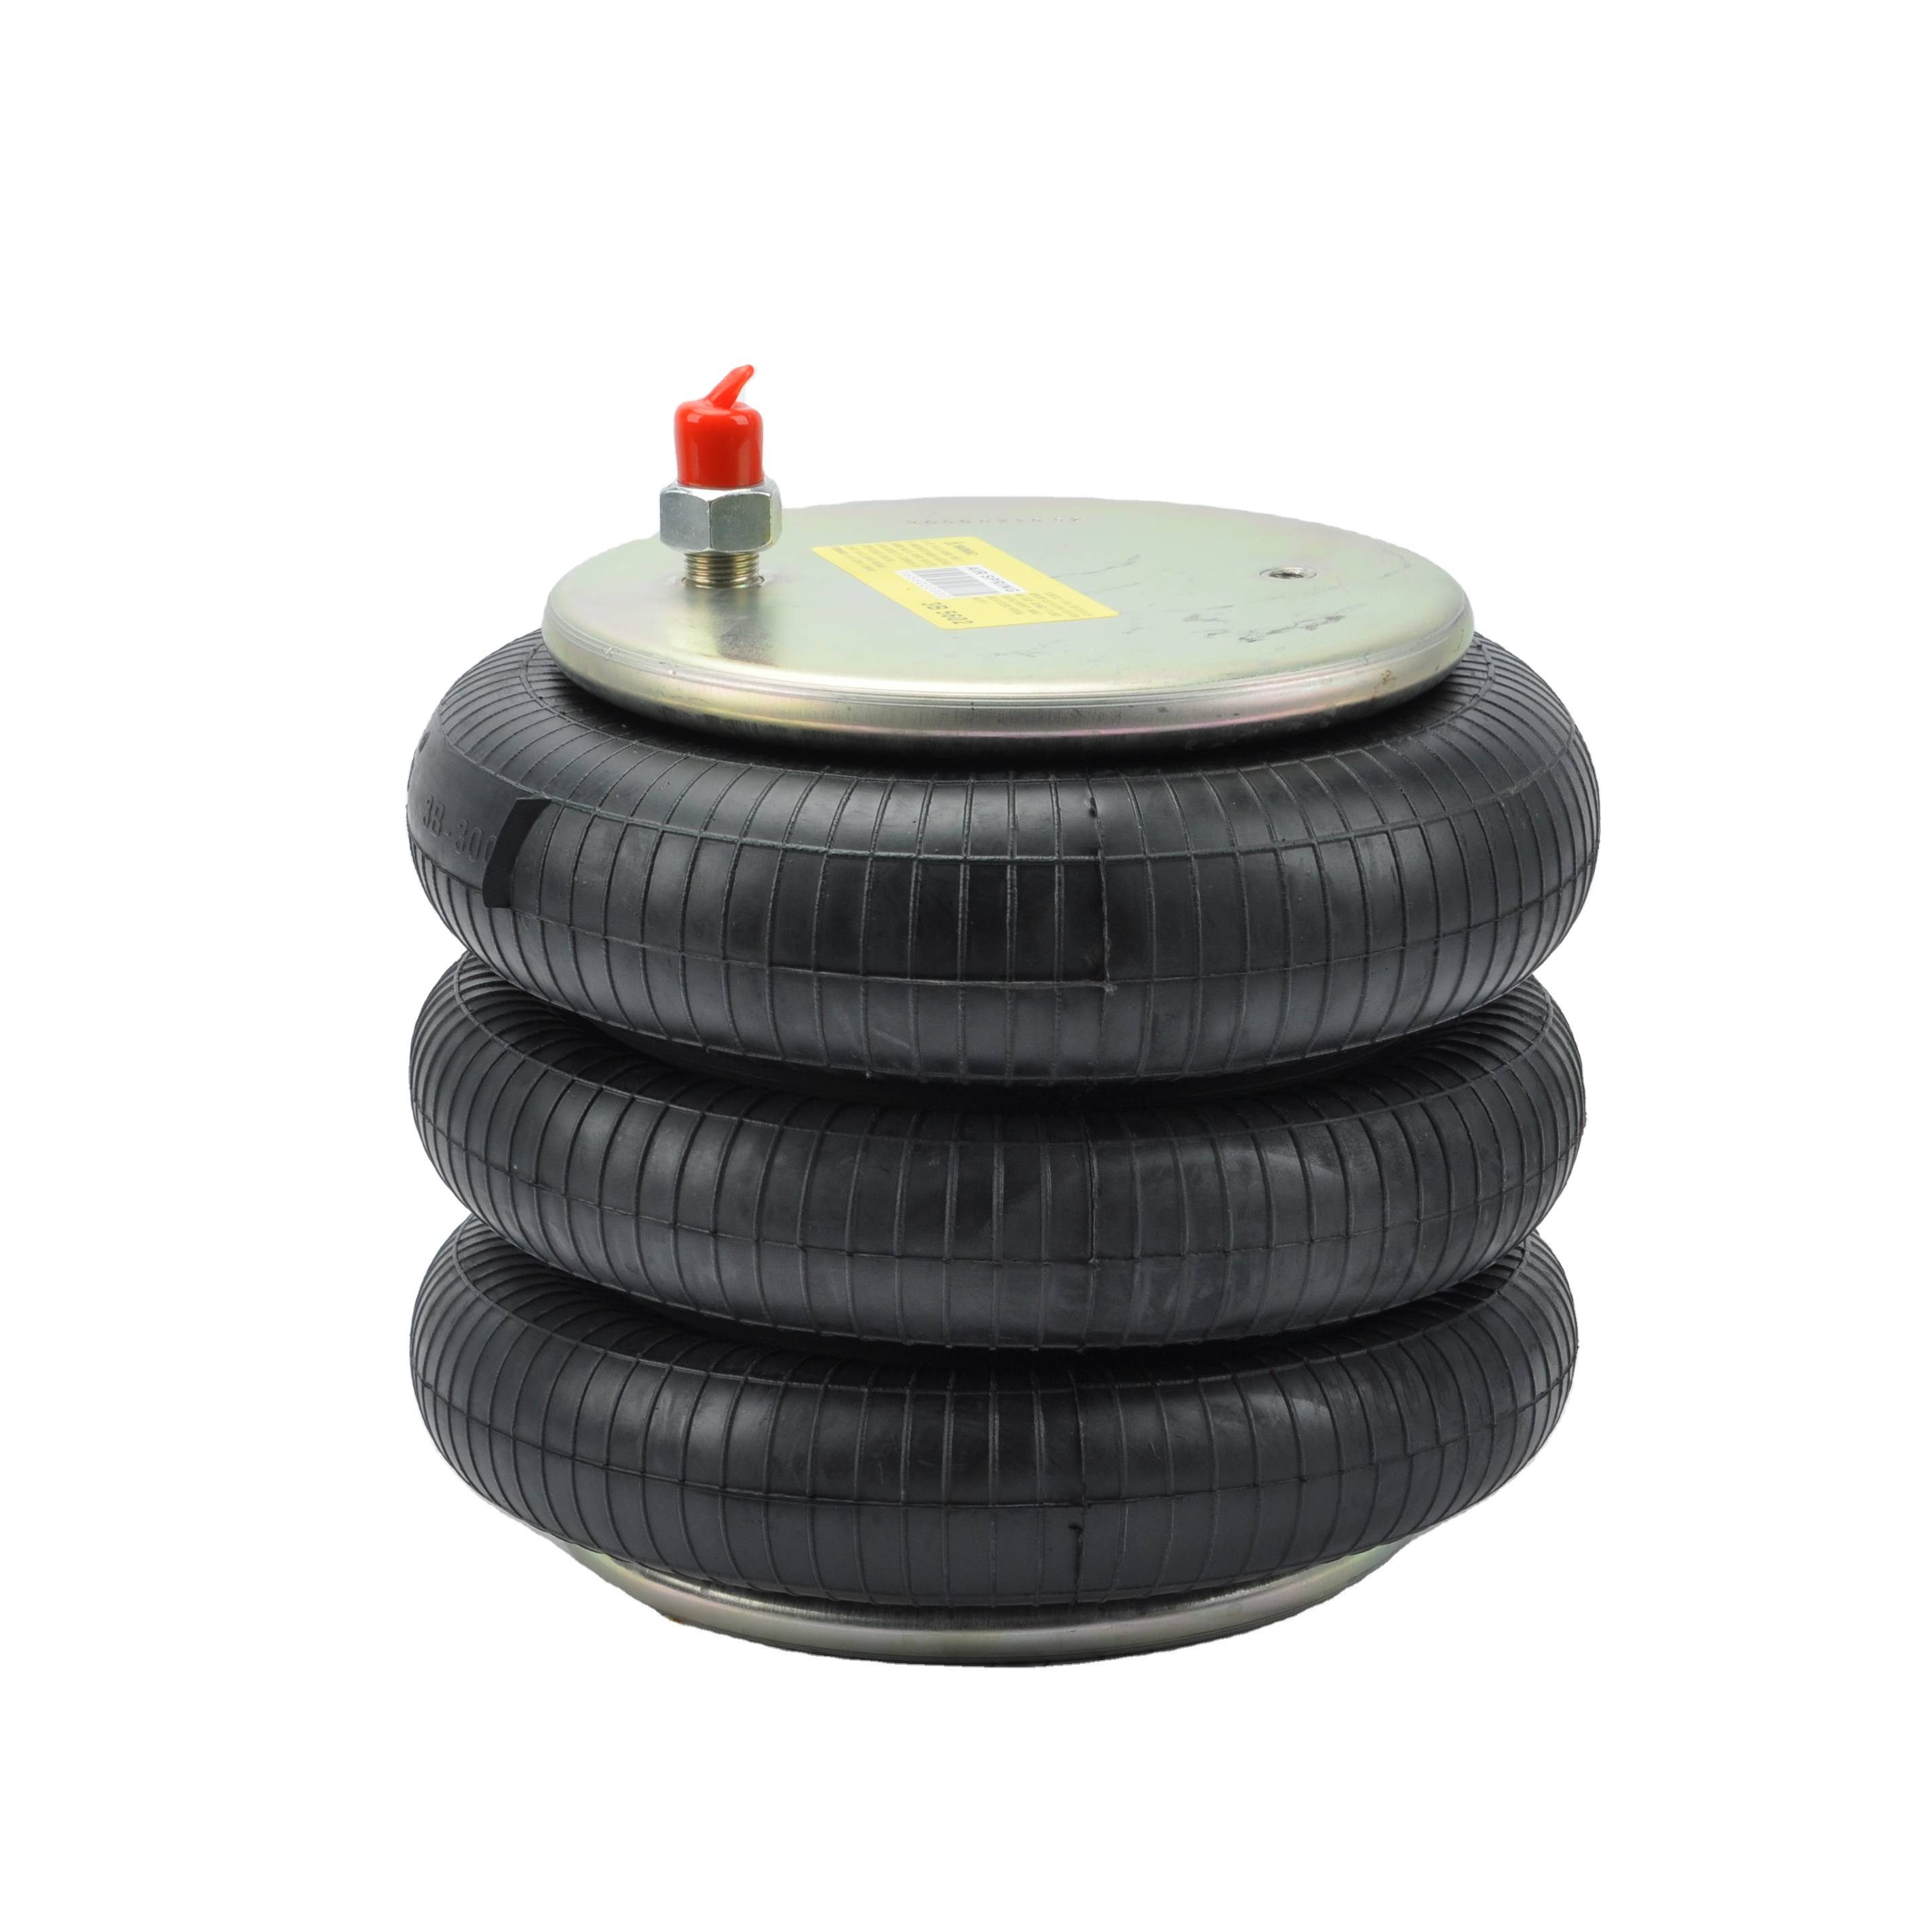 FACTORY OUTLETS TRIPLE CONVOLUTED AIR SPRING FIRESTONE W01-358-7994/CONTITECH FT330-29546/GOODYEAR 3B12-328